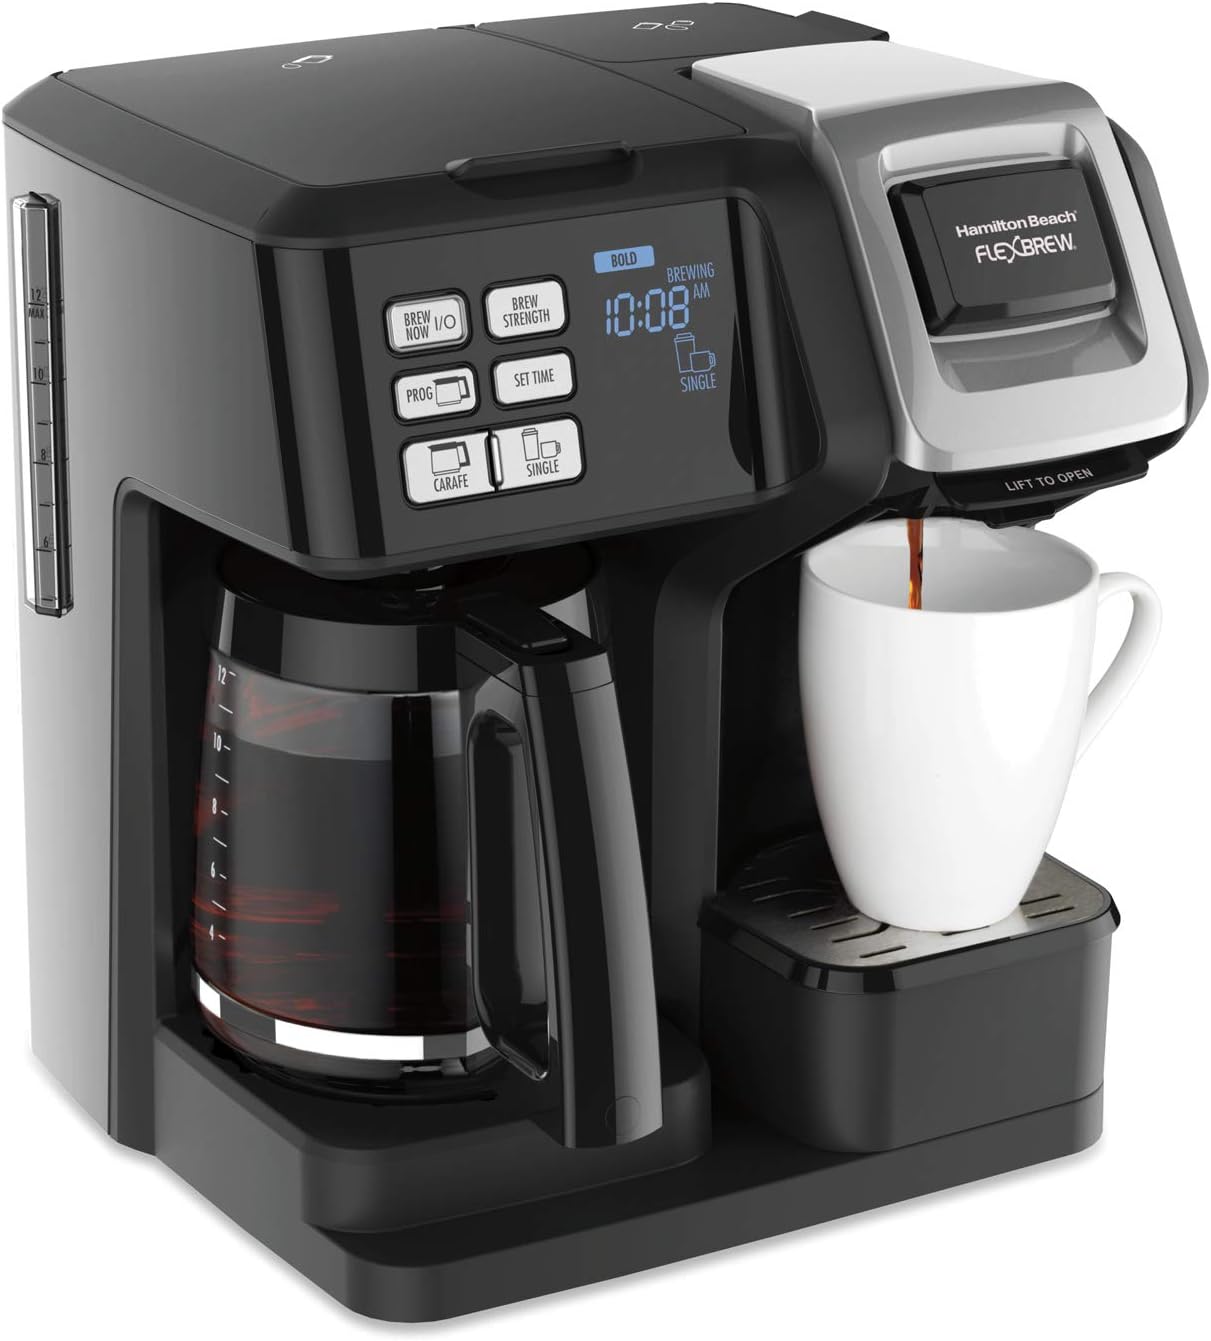 Hamilton Beach 49976 FlexBrew Trio 2-Way Coffee Maker, Compatible with K-Cup Pods or Grounds, Combo, Single Serve